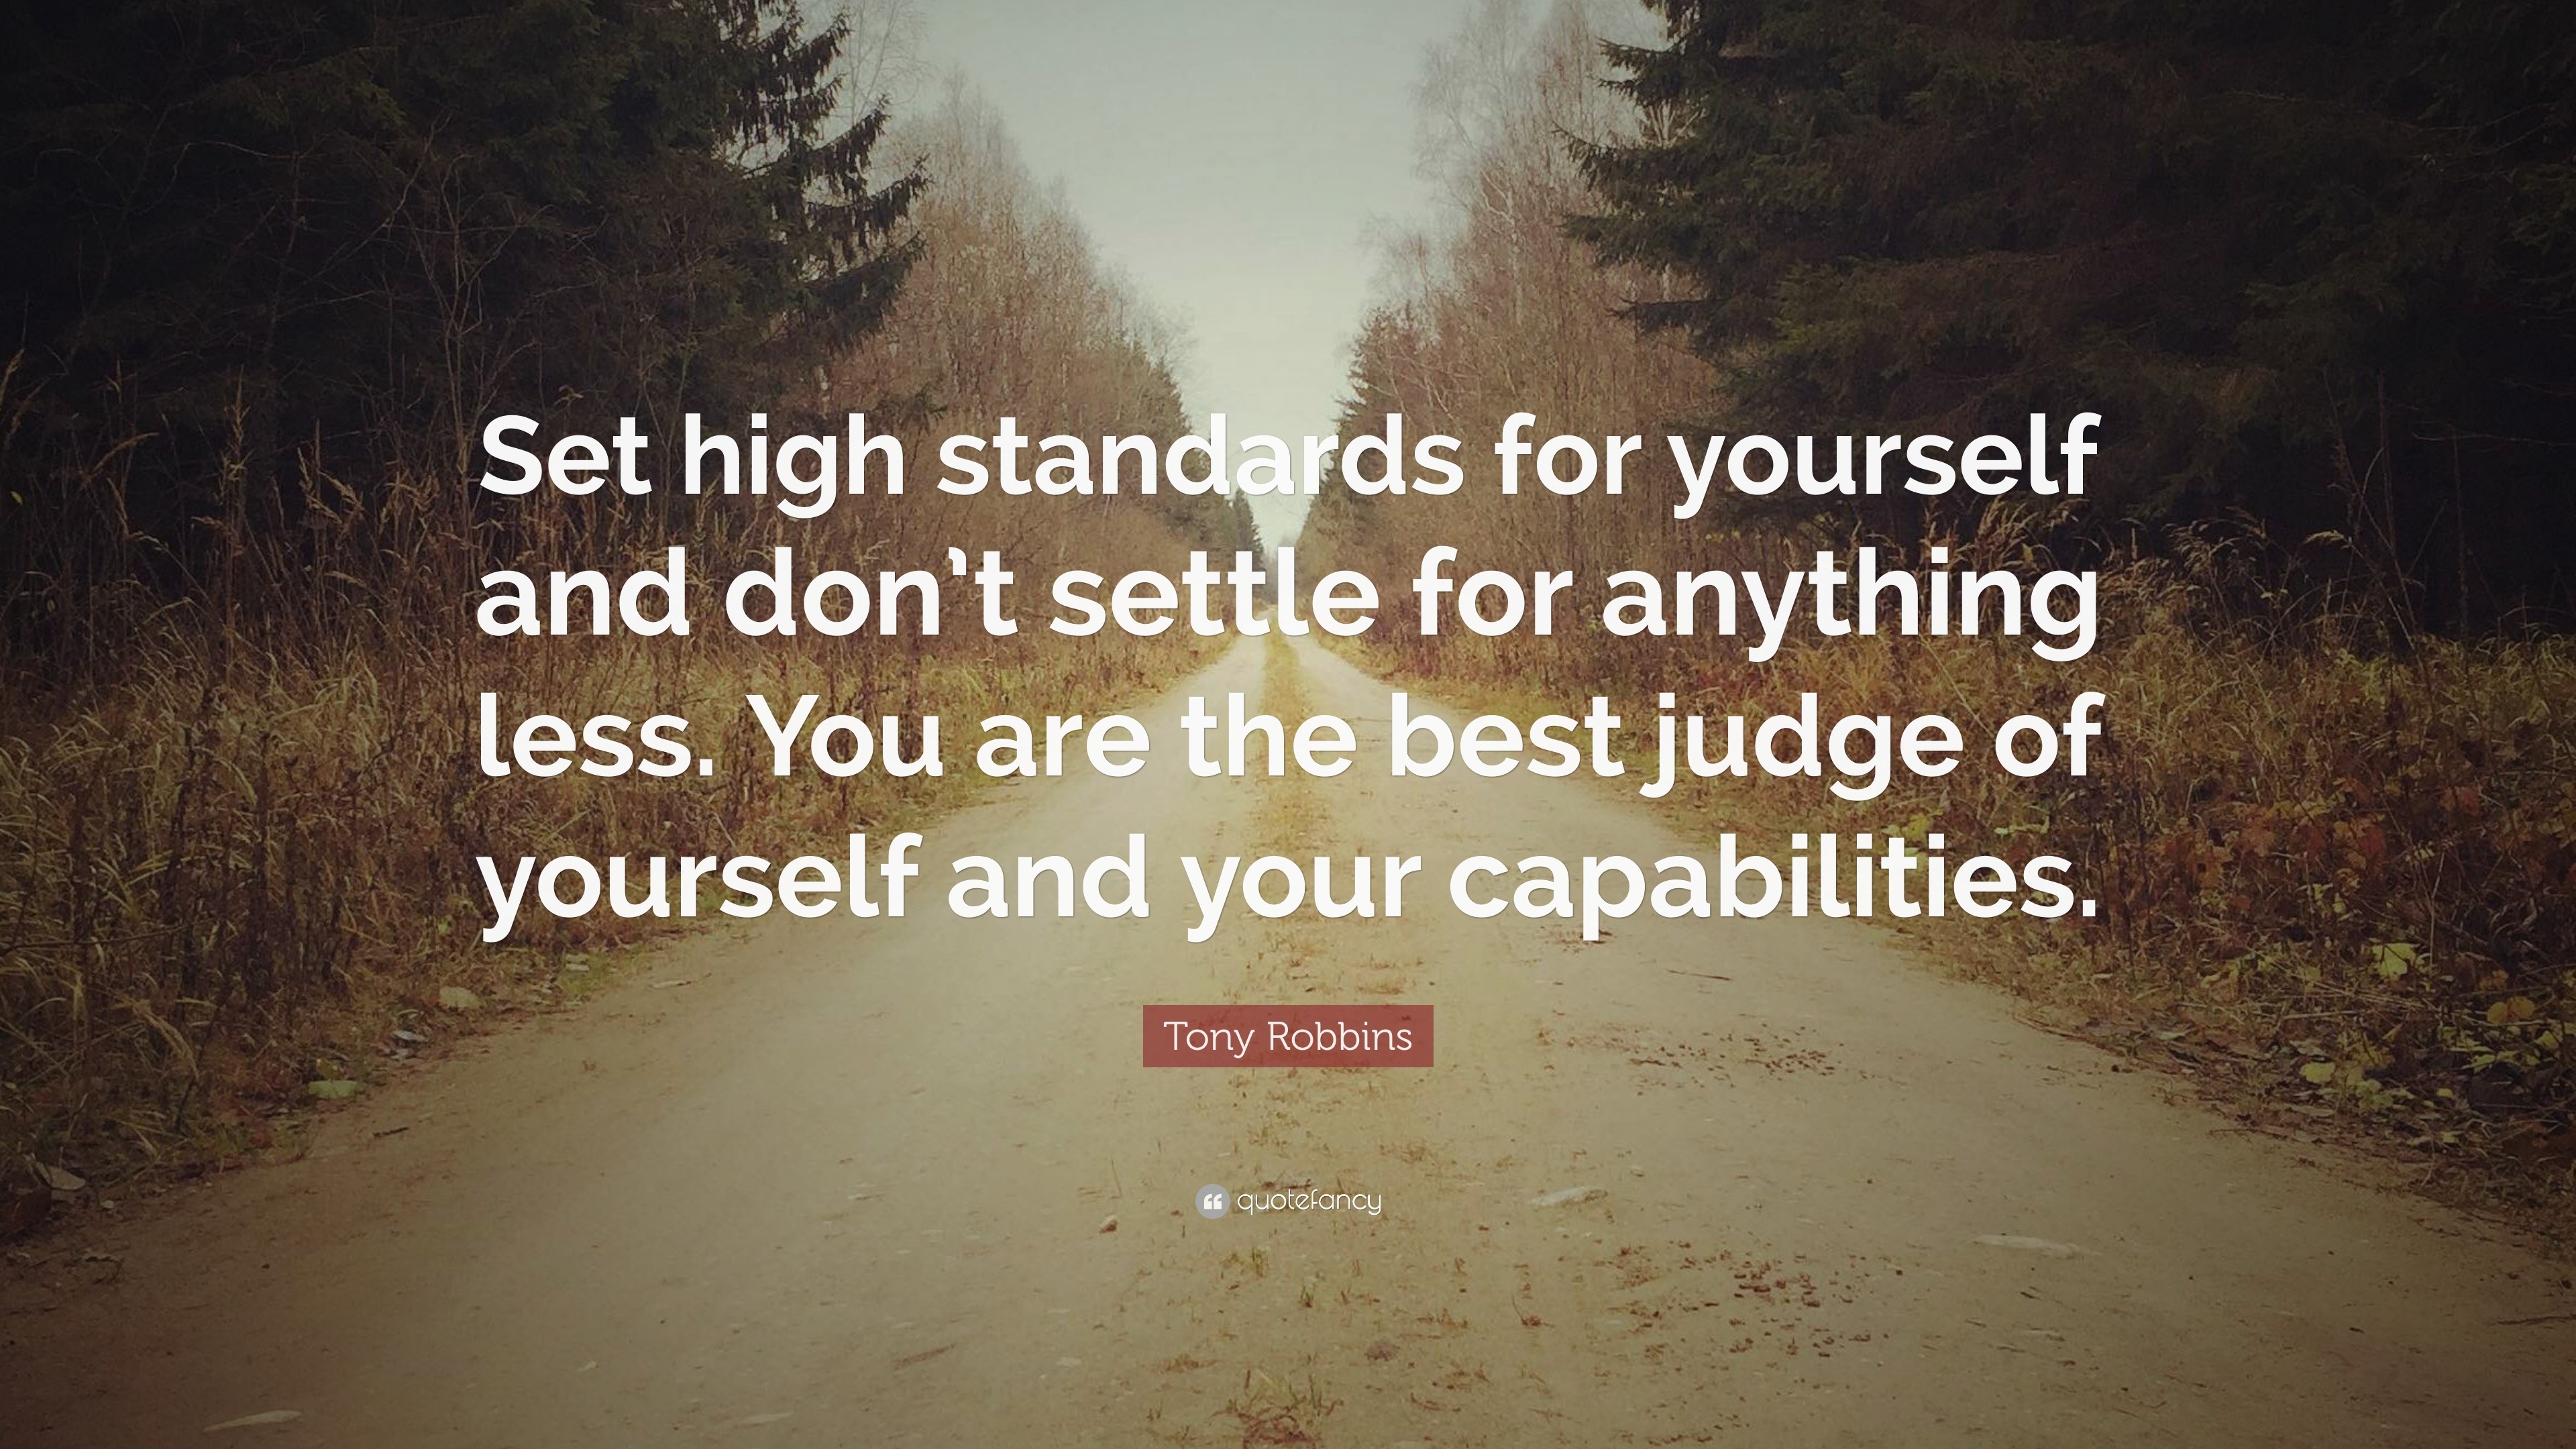 Tony Robbins Quote: “Set high standards for yourself and don’t settle